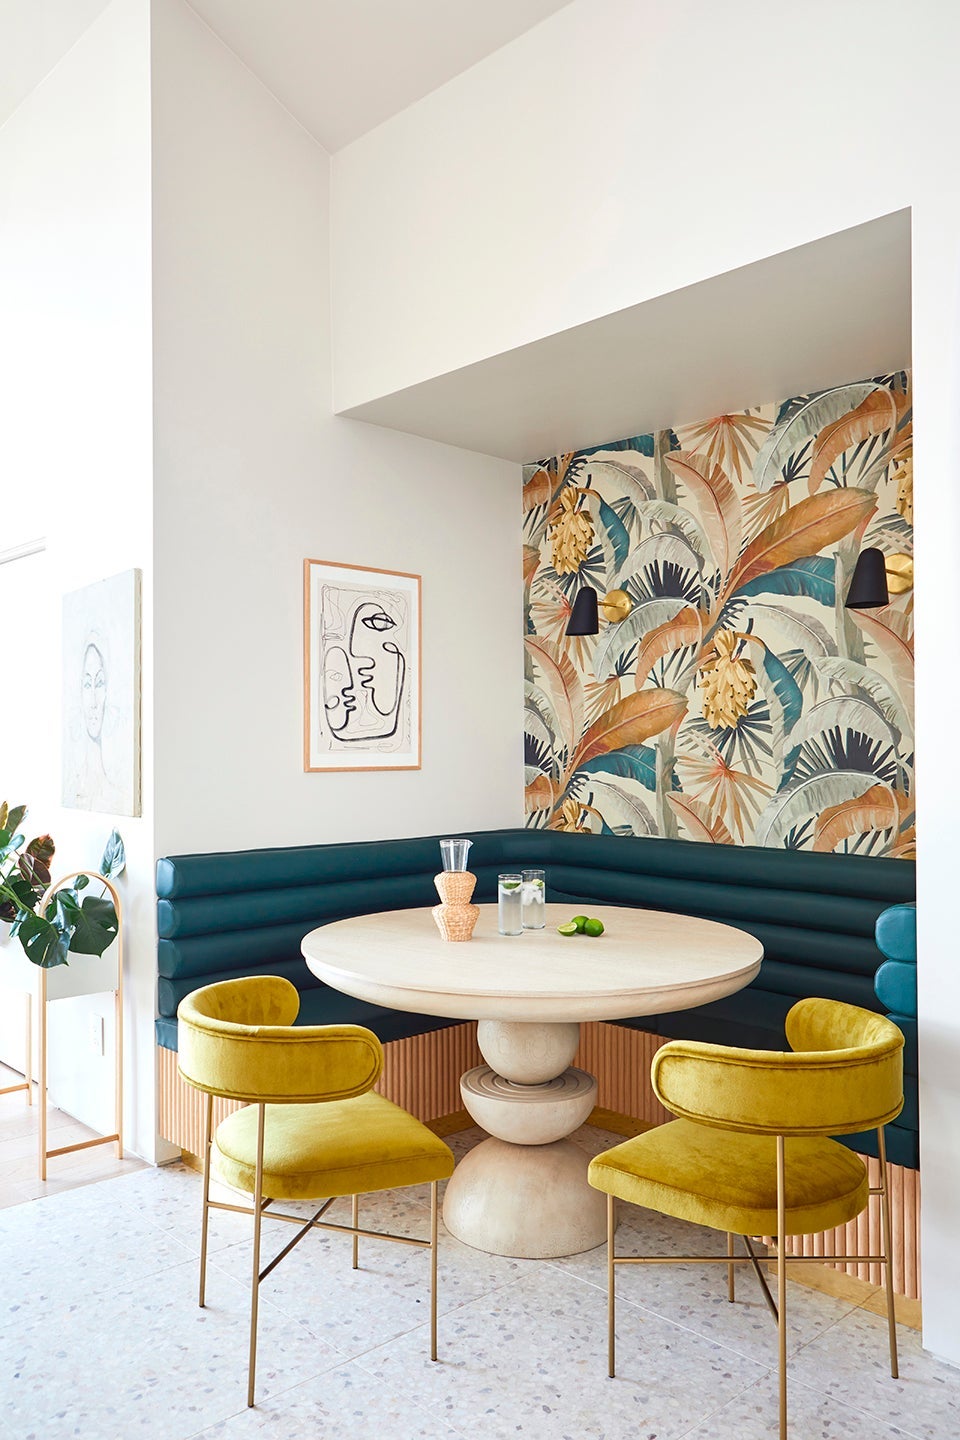 The Best Dining Tables, as Seen in Our Favorite Spaces